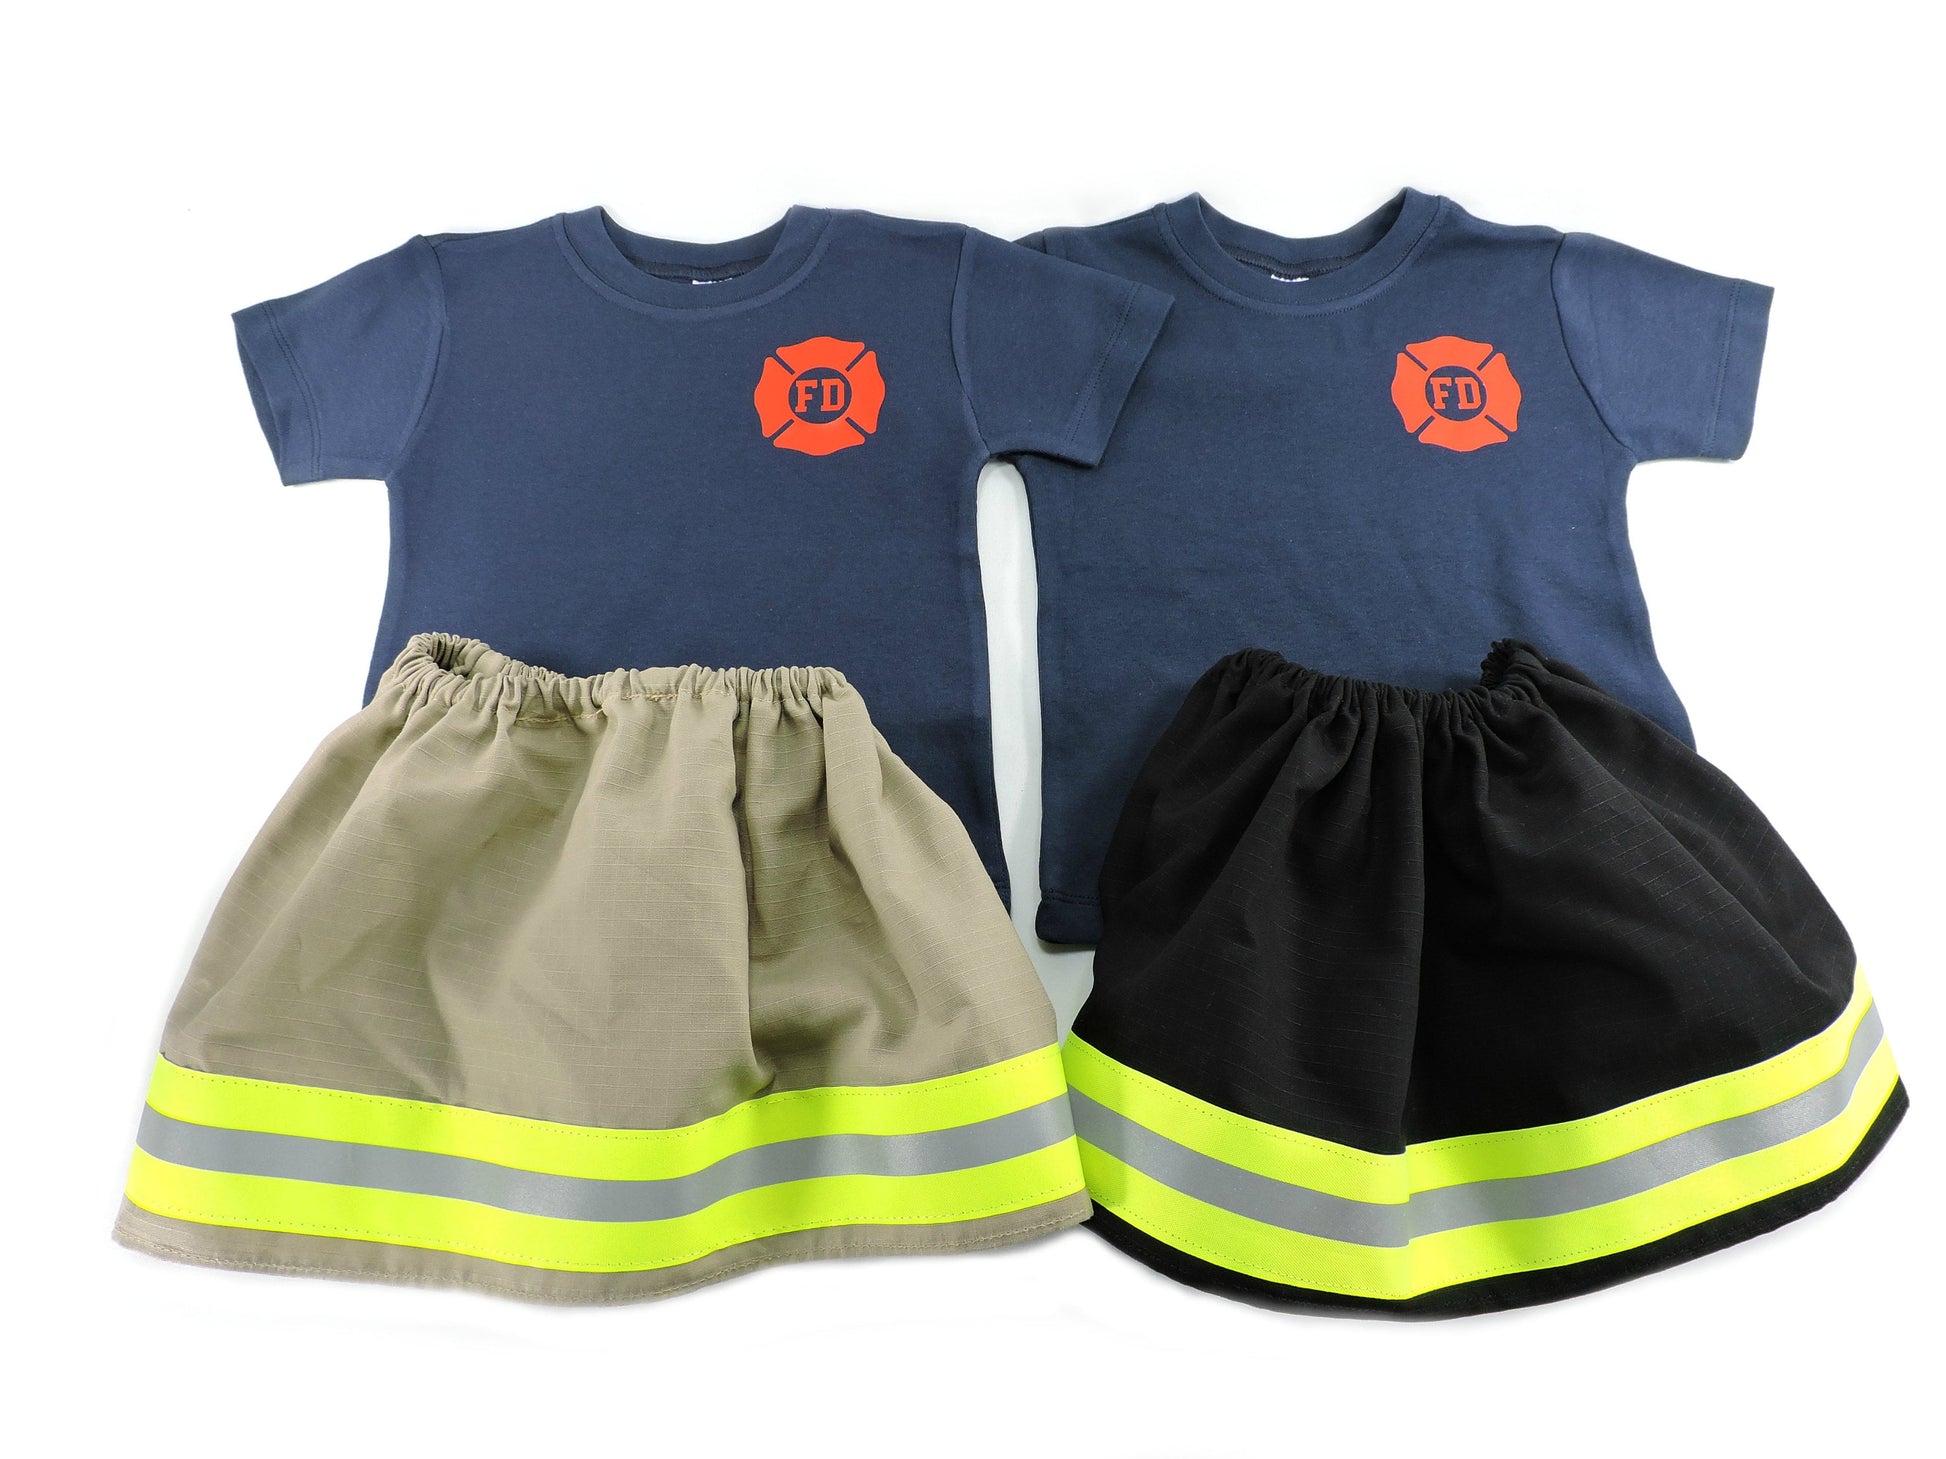 larger size baby girl firefighter outfit